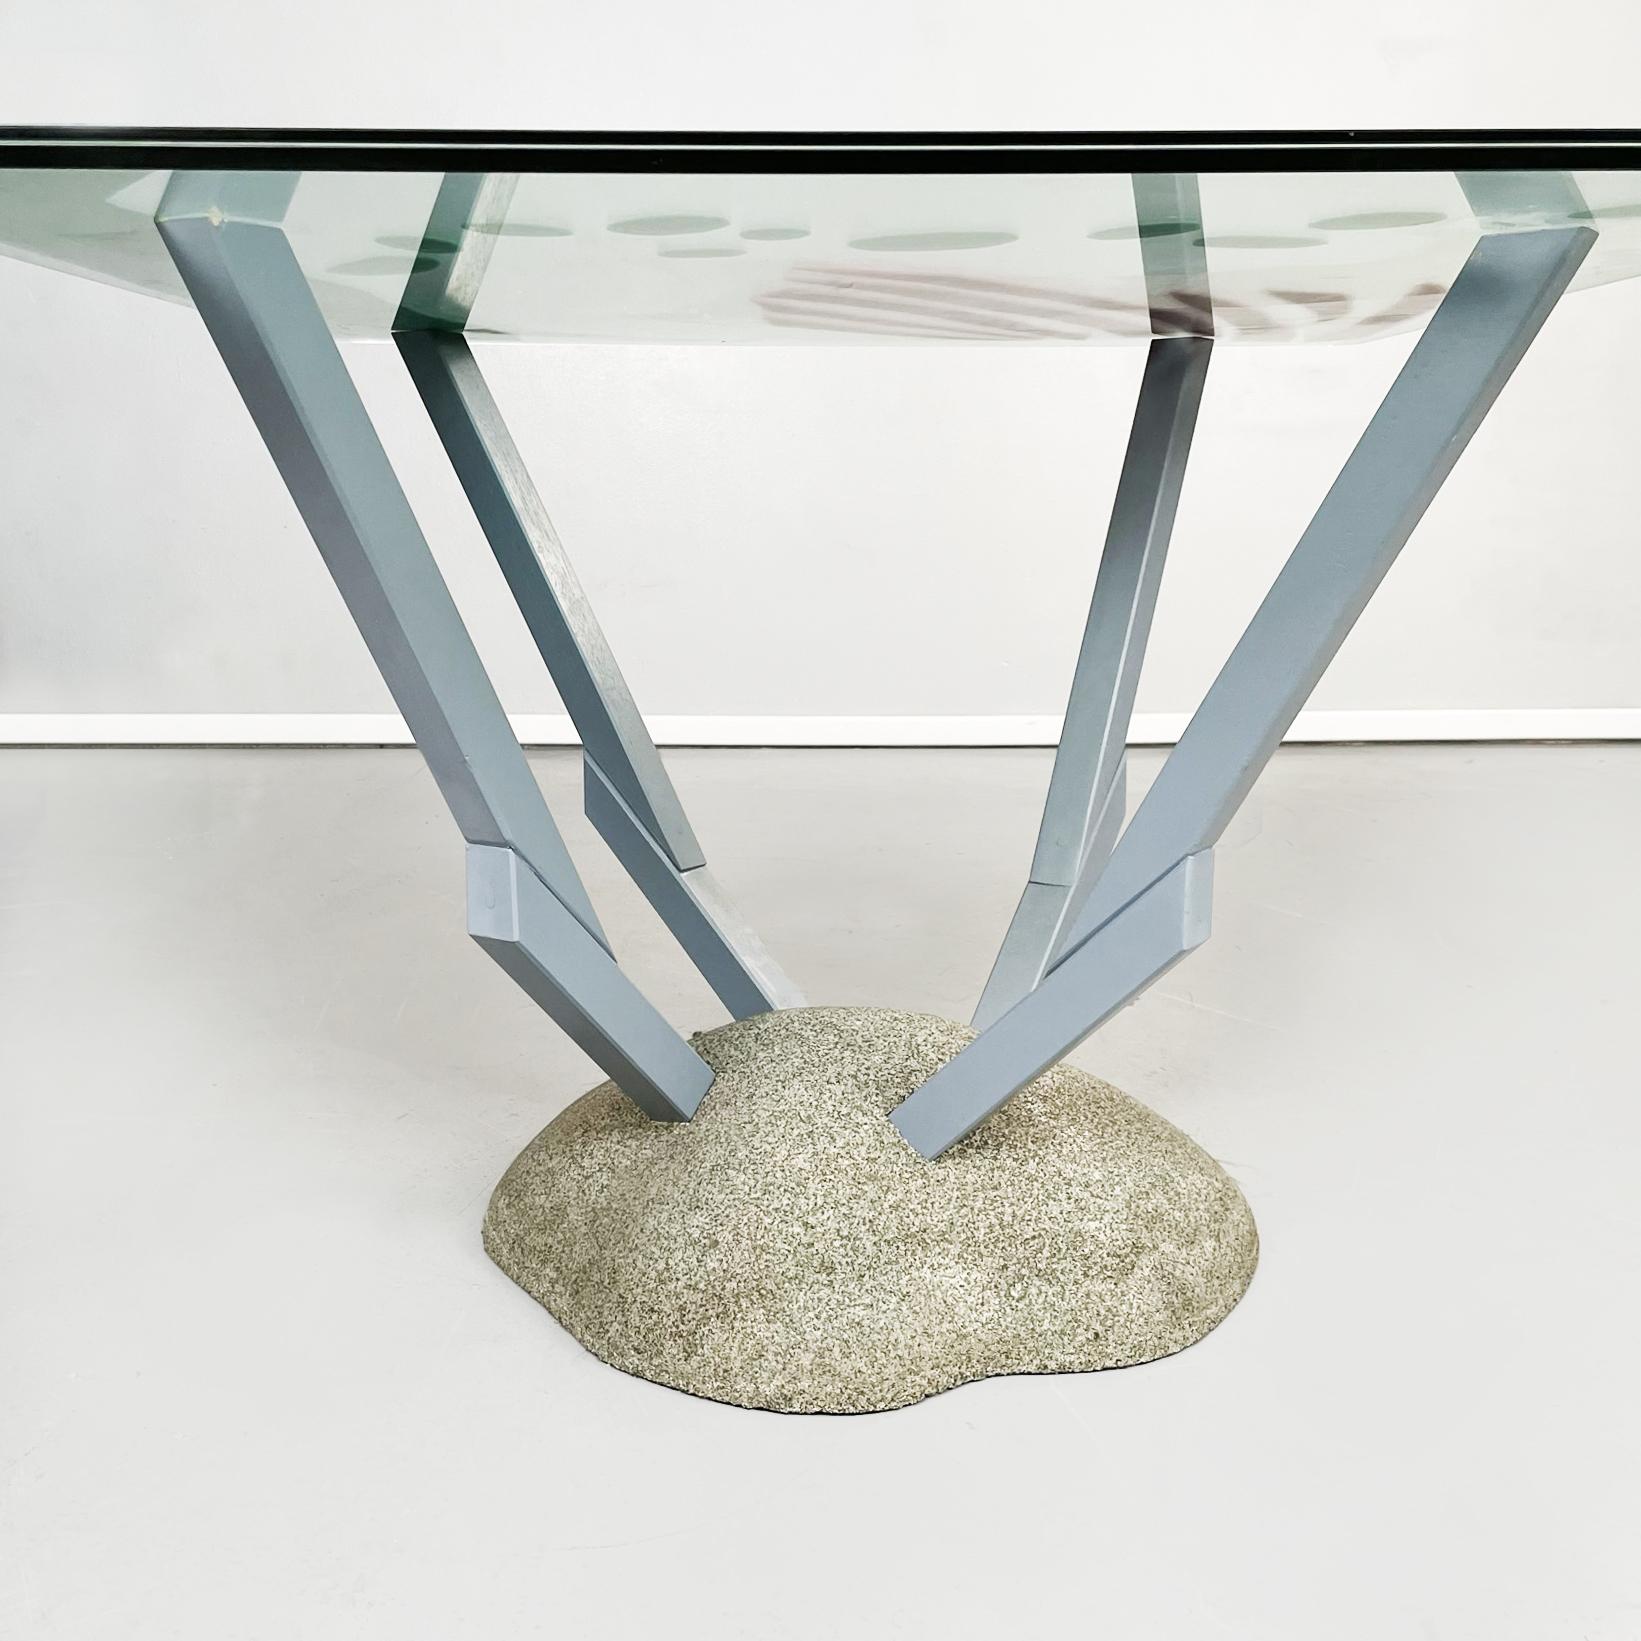 Italian Modern Glass Fabric Wood Table Artifici by Deganello for Cassina, 1985 For Sale 7